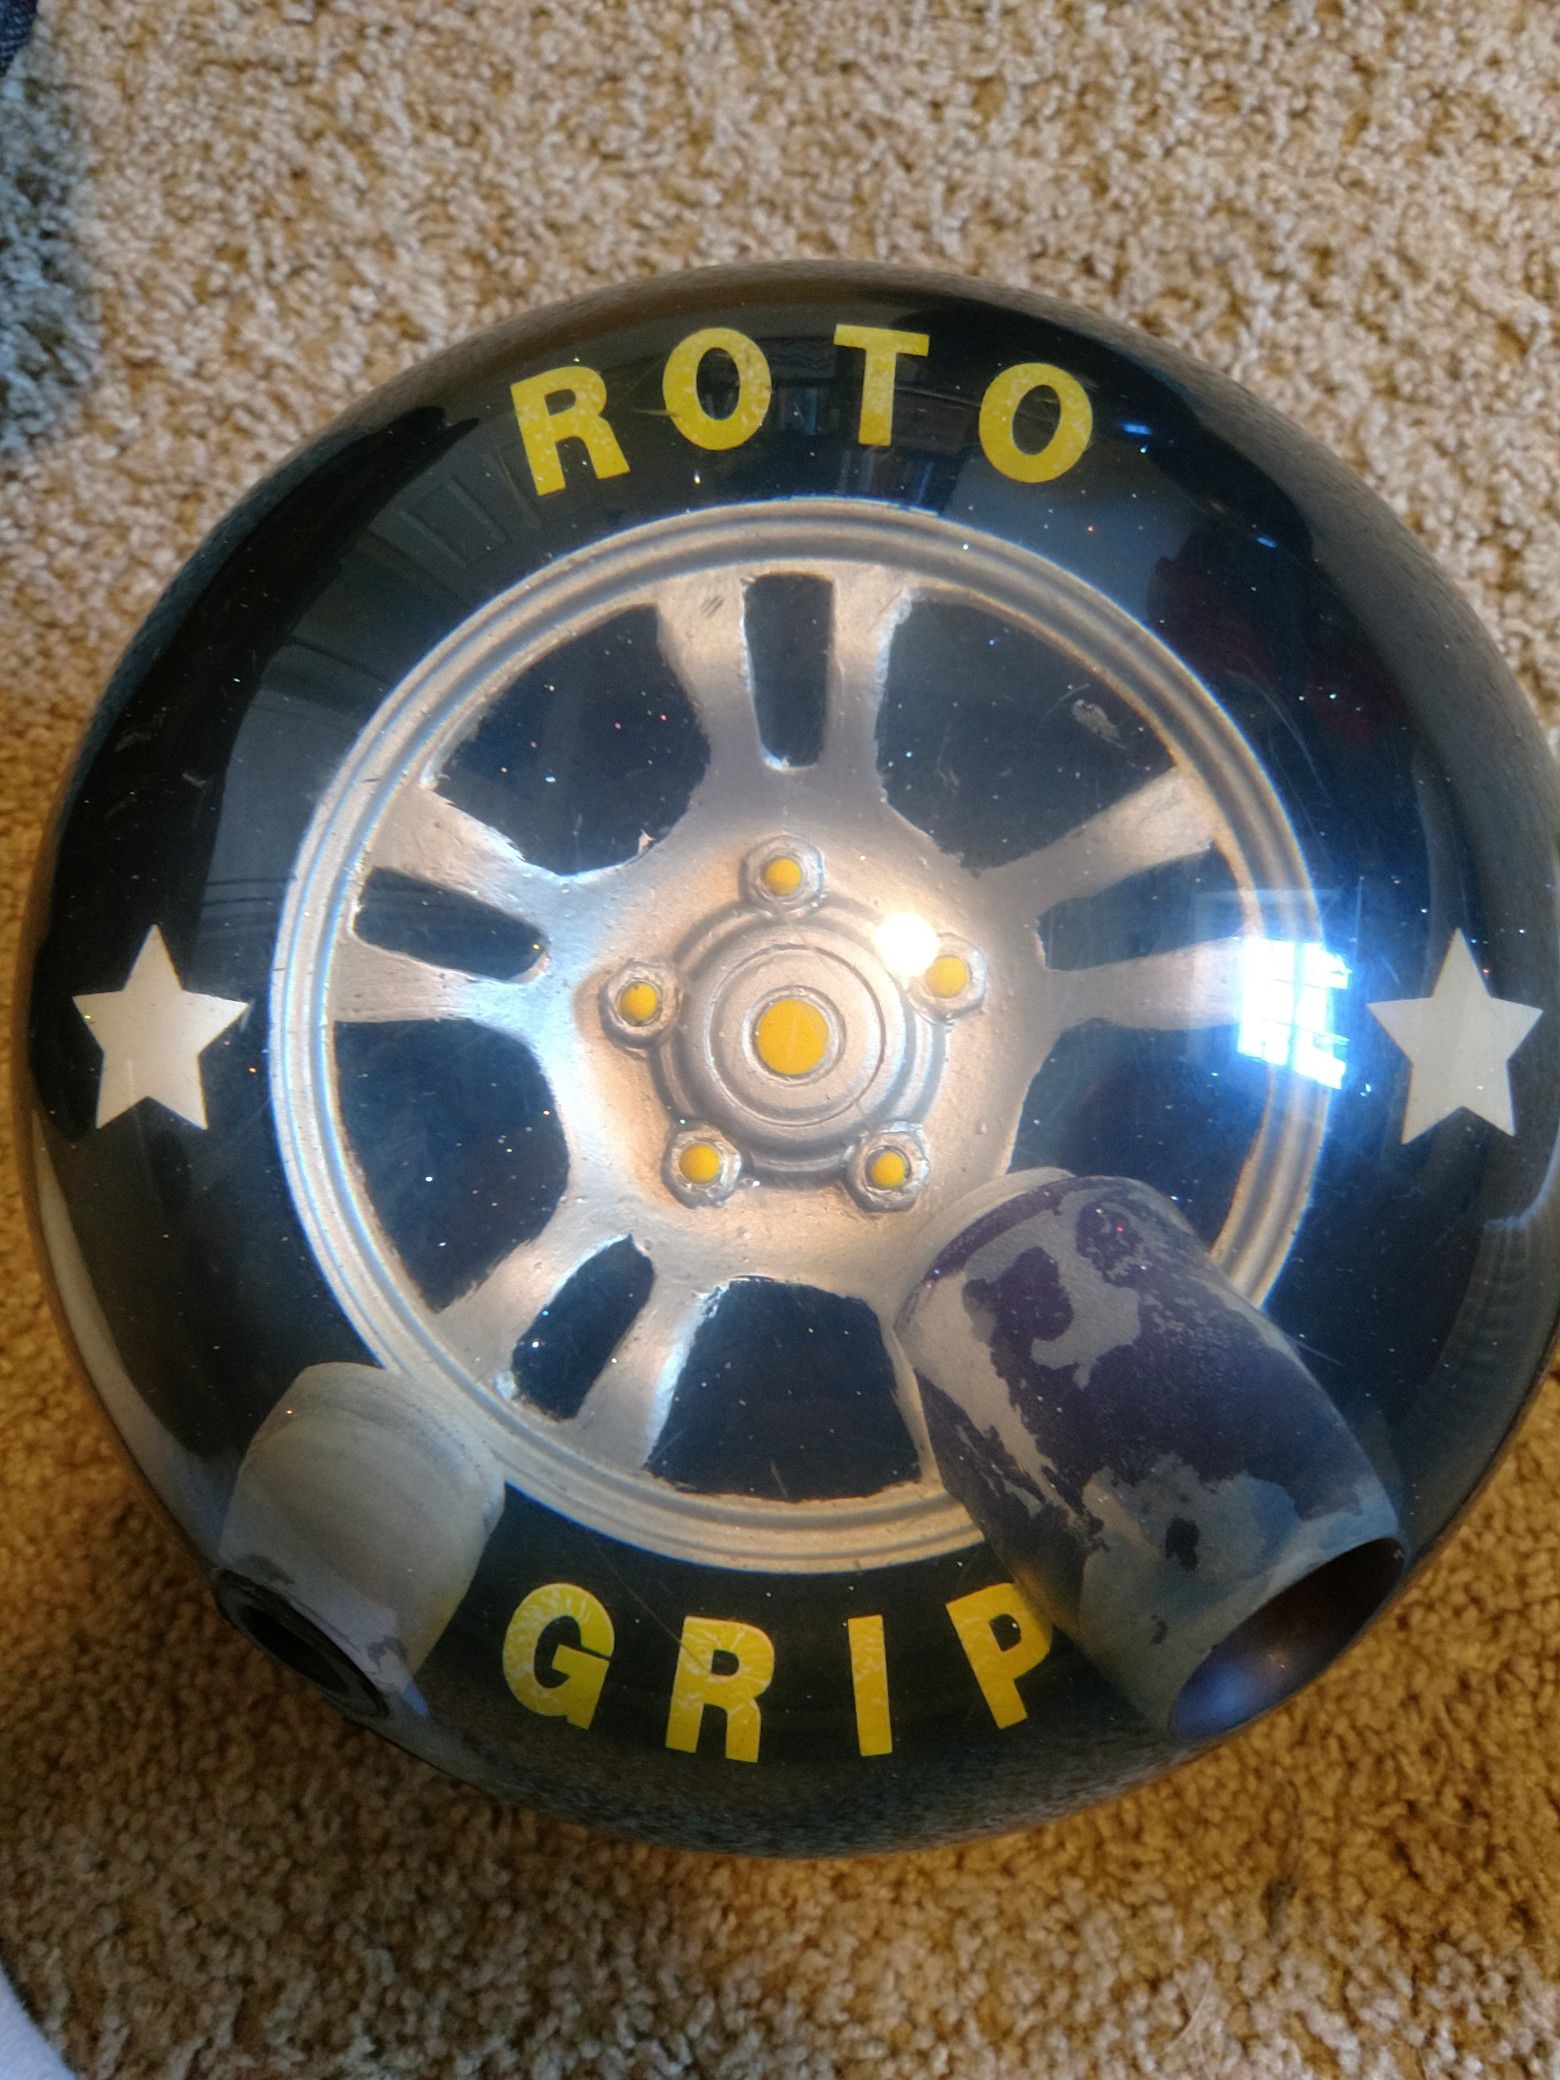 Roto Grip Spare Tire - 15 lbs bowling ball for Sale in Grand Rapids, MI -  OfferUp